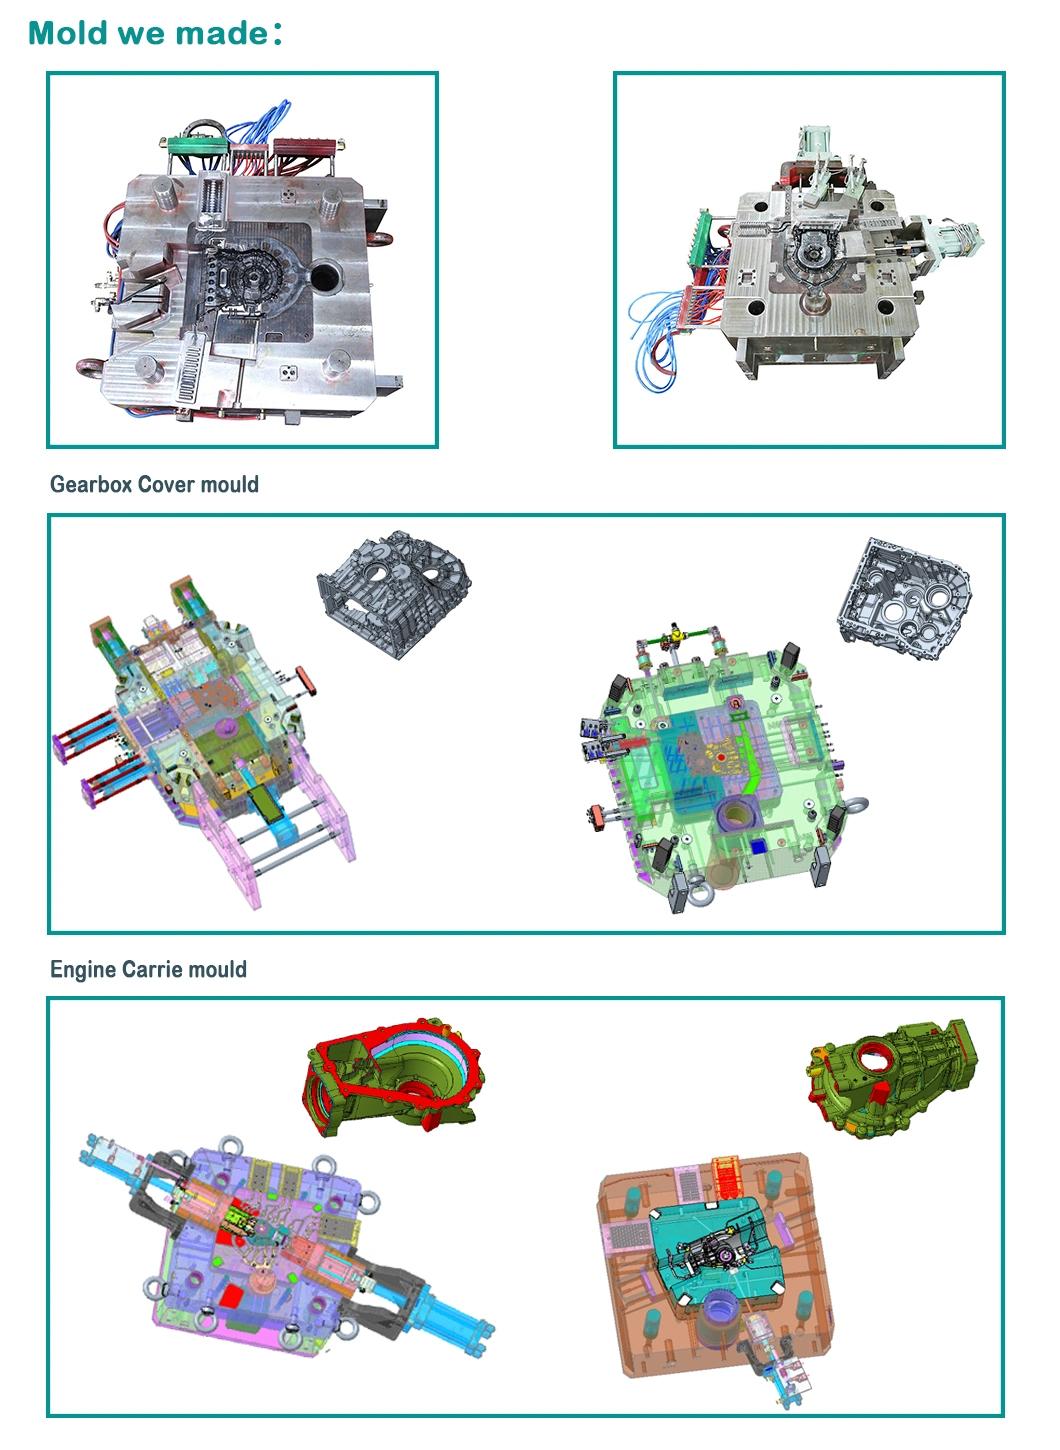 High Quality Fast Delivery Hpdc Auto Structual Part Die Casting Die Die Casting Mold From Mold Maker Symbos